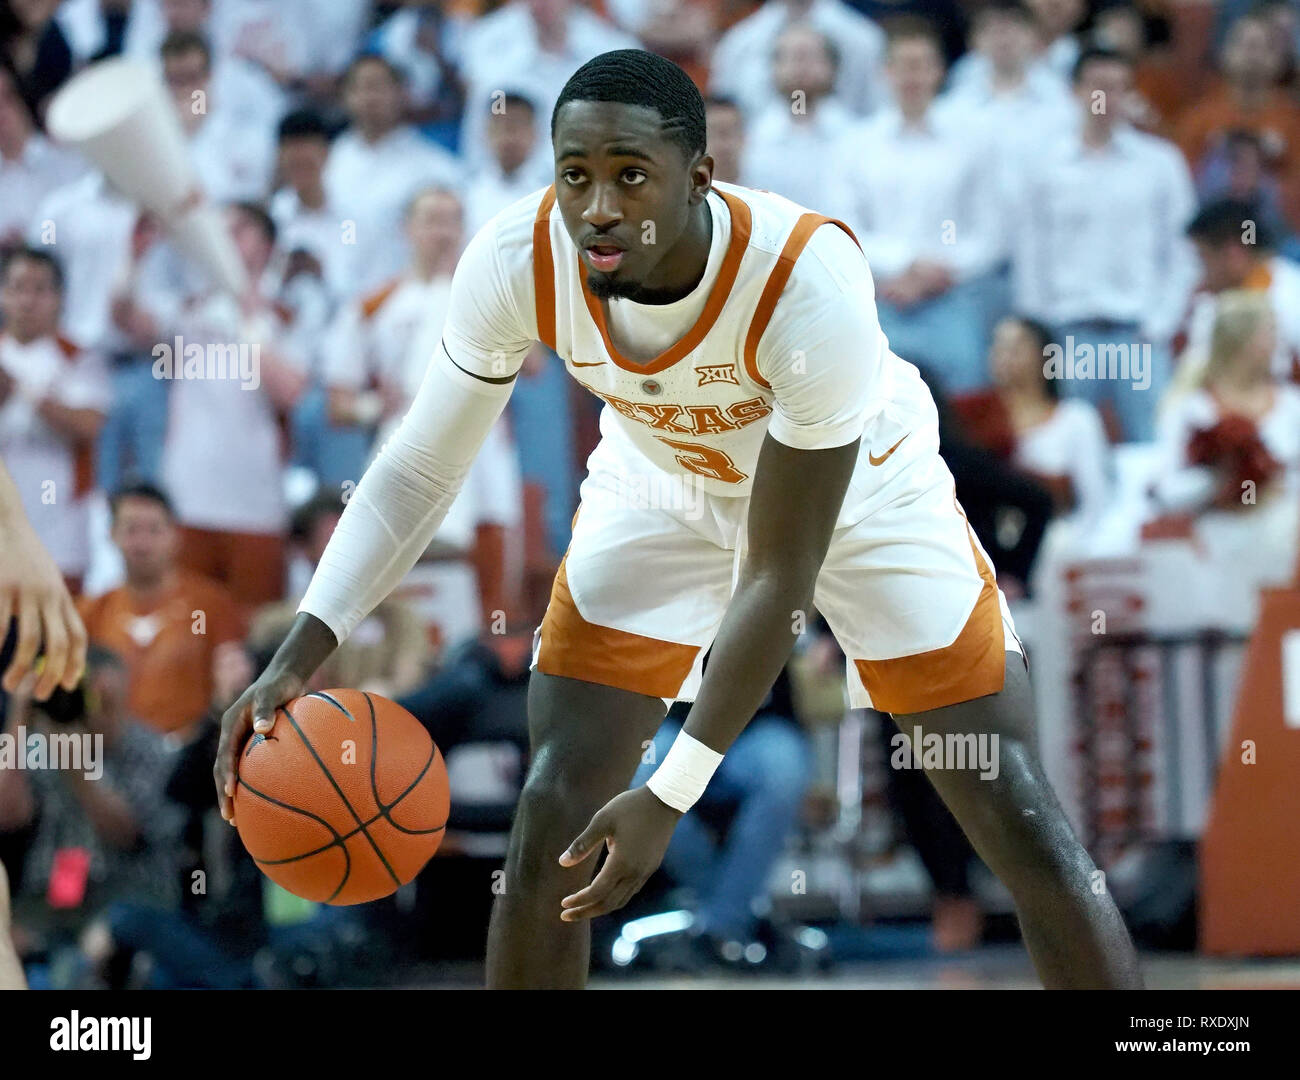 March 9, 2019. Courtney Ramey #3 of the Texas Longhorns in action vs the TCU Horned Frogs at the Frank Erwin Center in Austin Texas. TCU beats Texas 69-54.Robert Backman/Cal Sport Media. Stock Photo